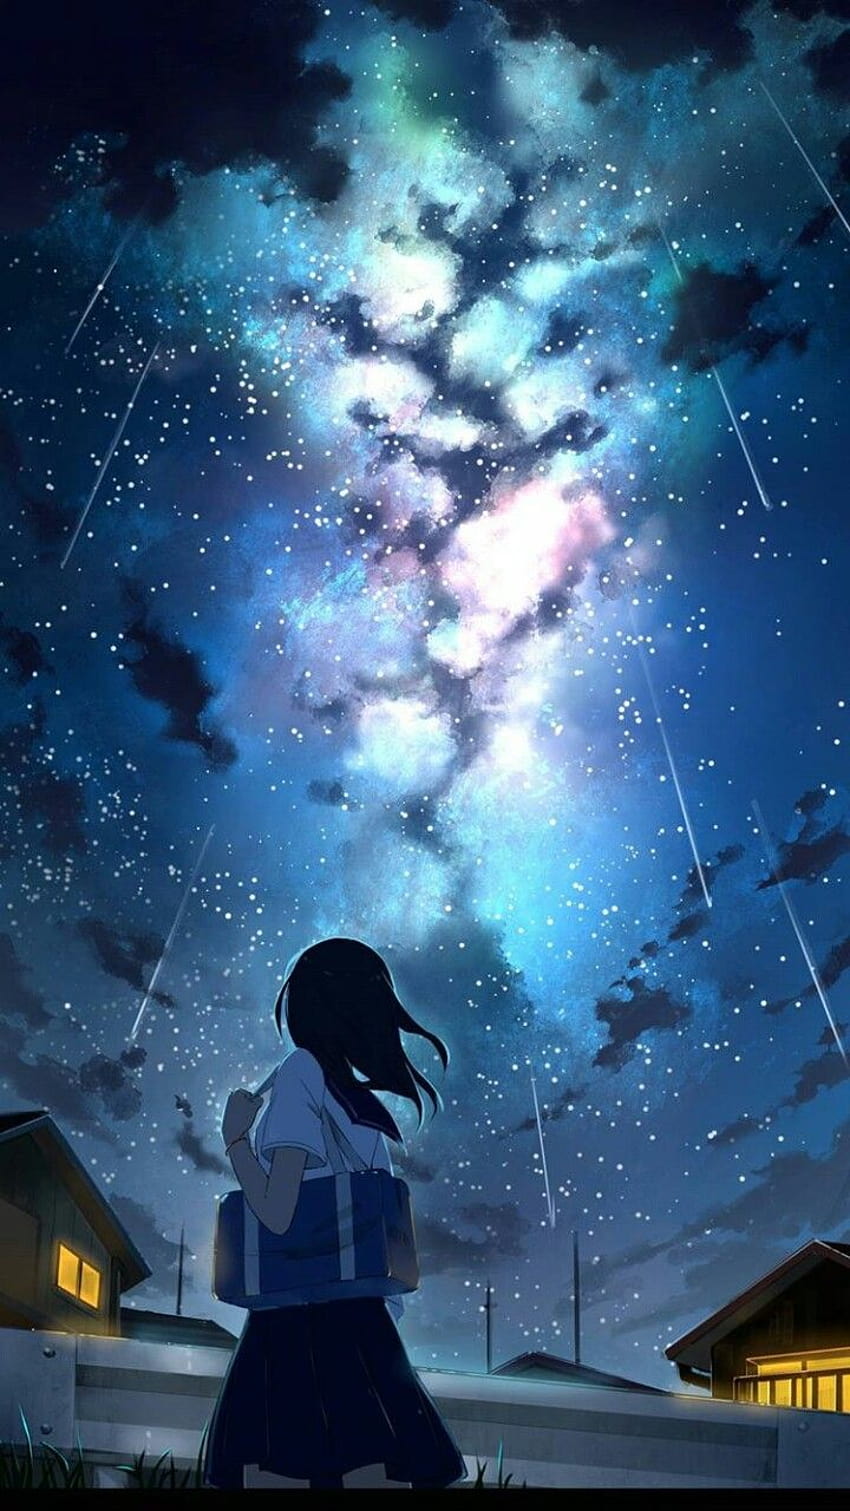 Amazon.com: Composition Notebook College Ruled: Anime Constellation People,  Perfect for Writing, Size 8.5x11 Inches, 120 Pages: Houston, Diana: Books